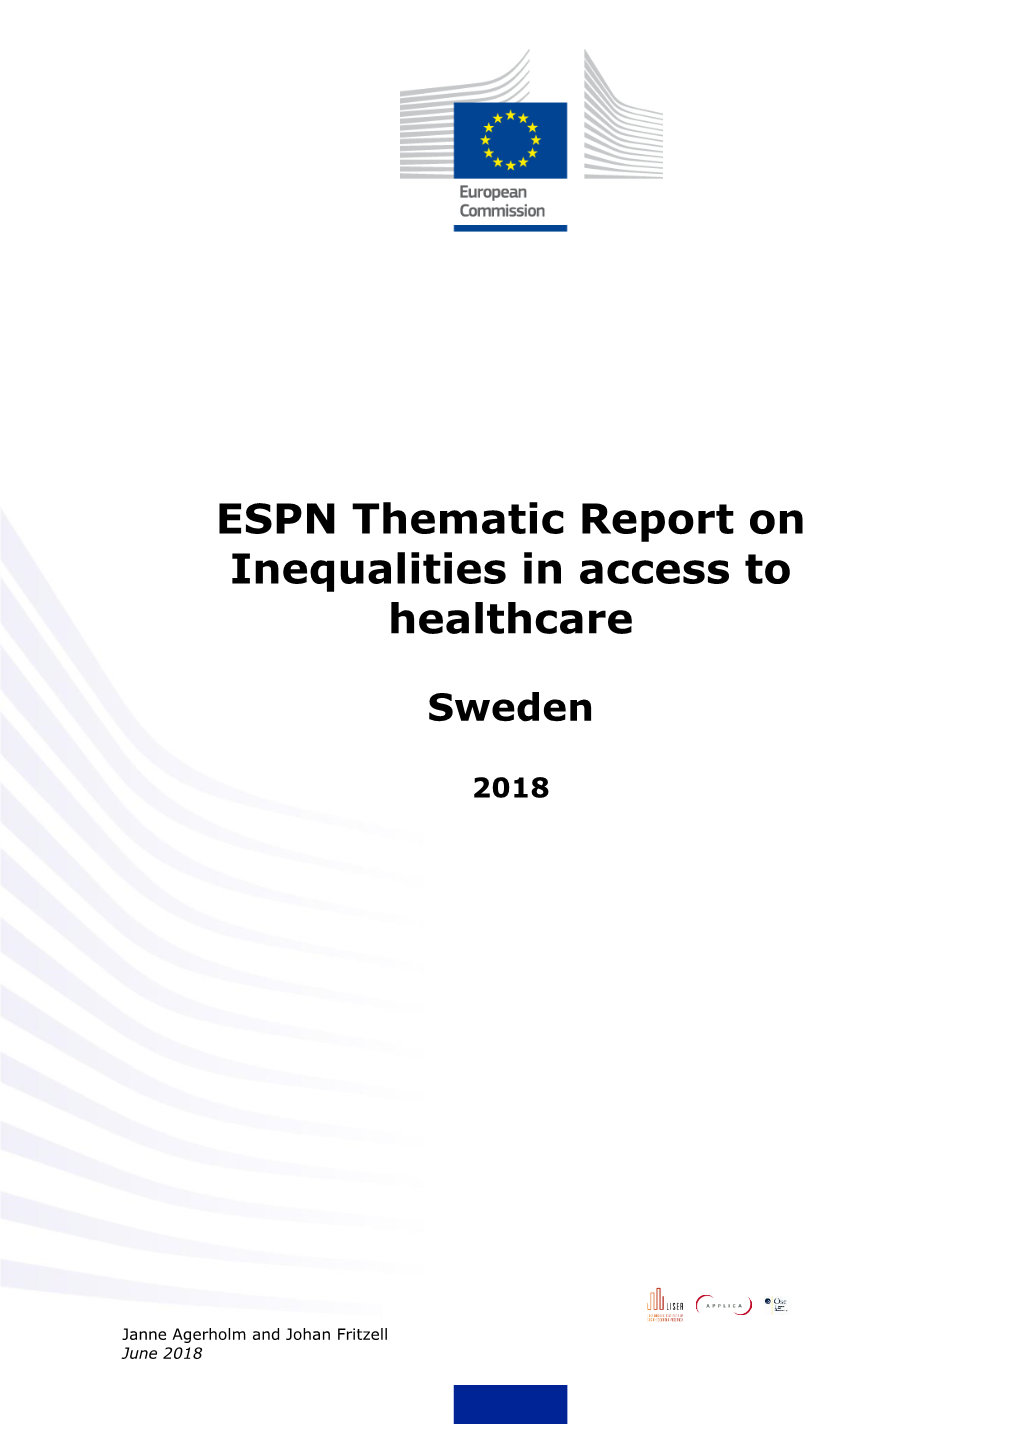 ESPN Thematic Report on Inequalities in Access to Healthcare